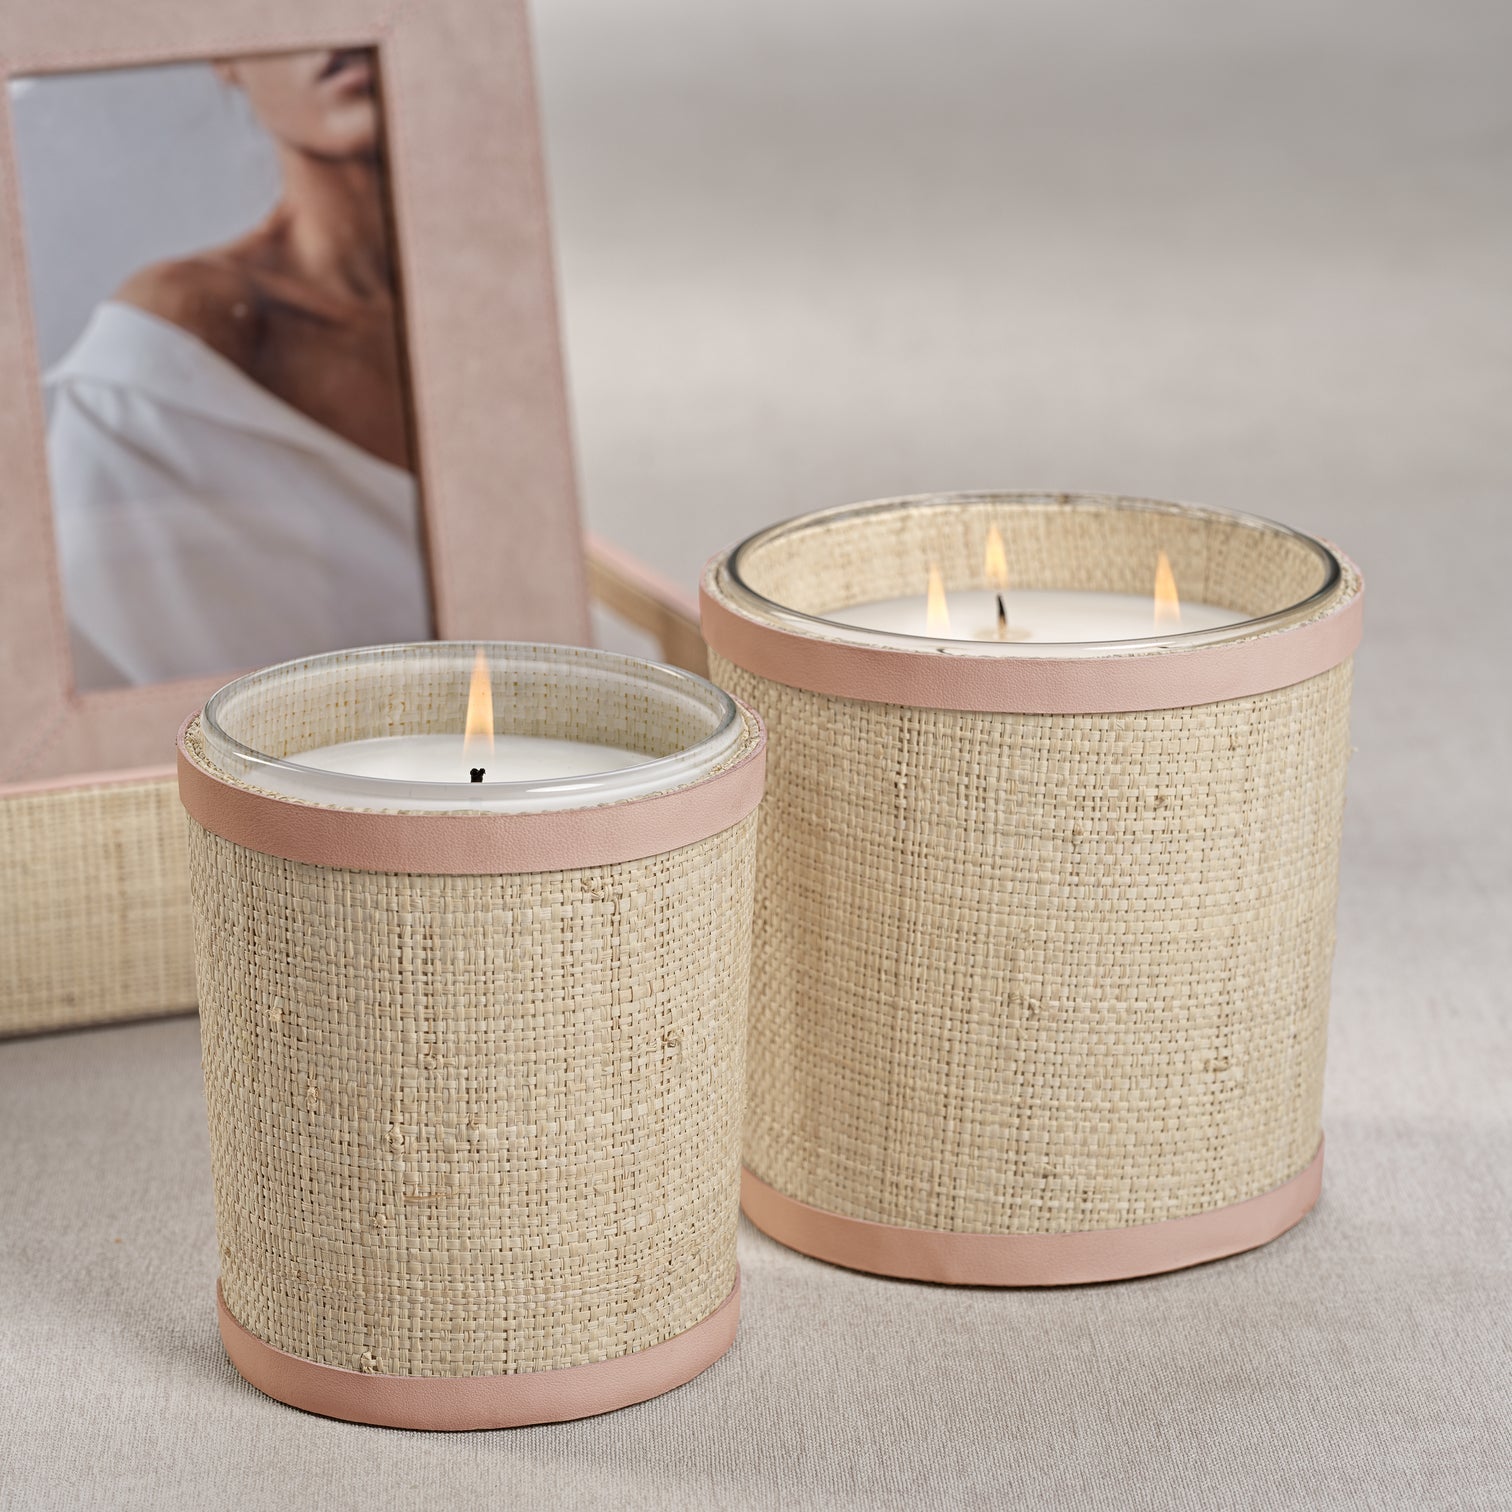 Candle in Natural Raffia Basket w/ Leather Trim - Pink